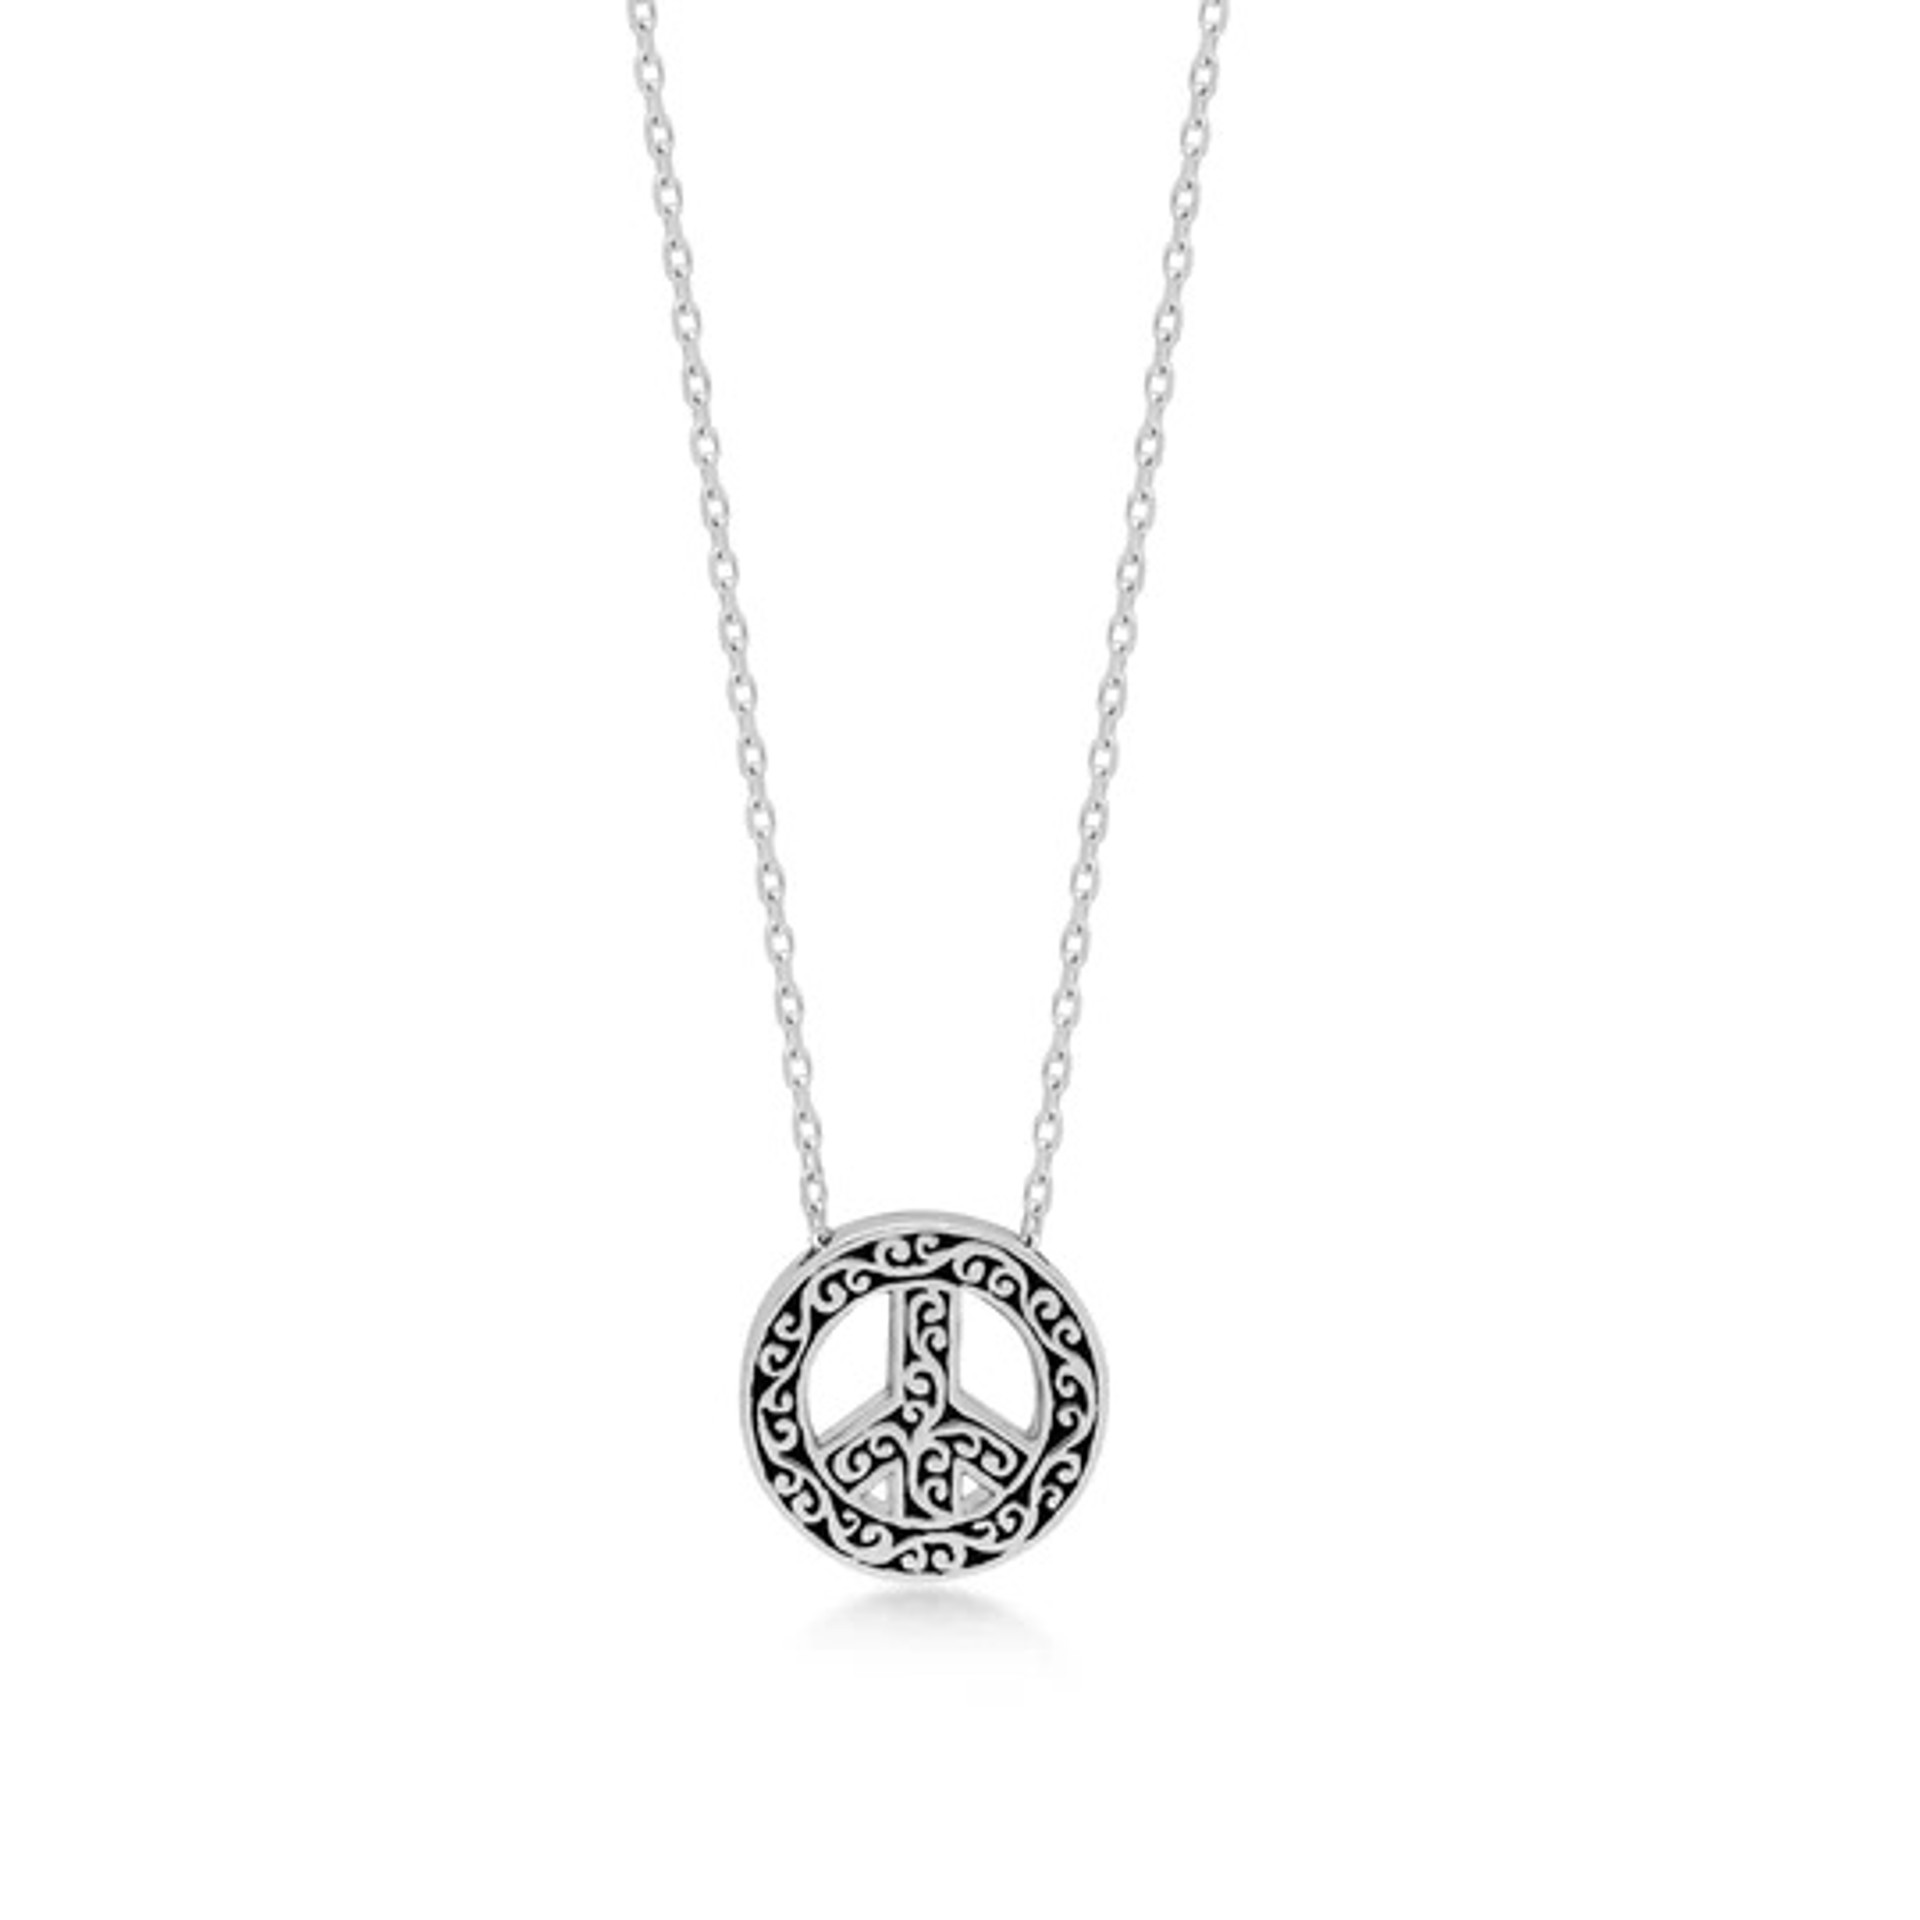 LH Signature Scroll Sterling Silver Delicate Peace Sign Pendant Necklace in Adjustable Chain by Lois Hill